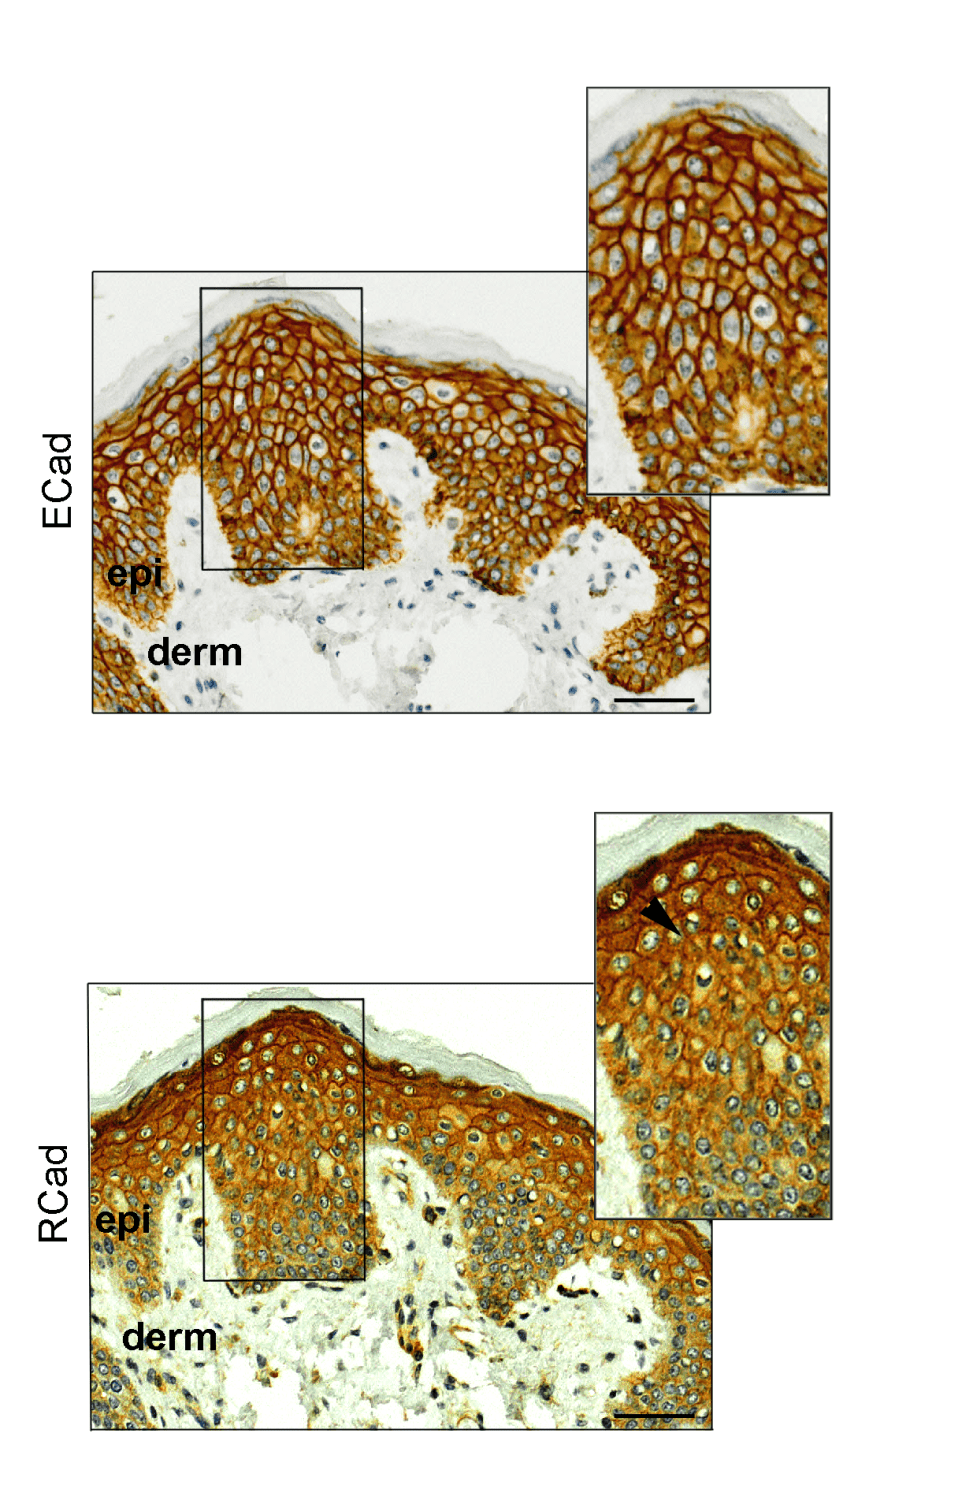 Immunohistochemical analysis of E-cadherin (ECad) and R-cadherin (RCad) in normal skin samples from breast cancer patients before starting capecitabine treatment. Unlike ECad (top), RCad (bottom) expression is mostly observed in the suprabasal epidermal layers, which are affected in the hand-foot syndrome. <b>/CNIO</b>